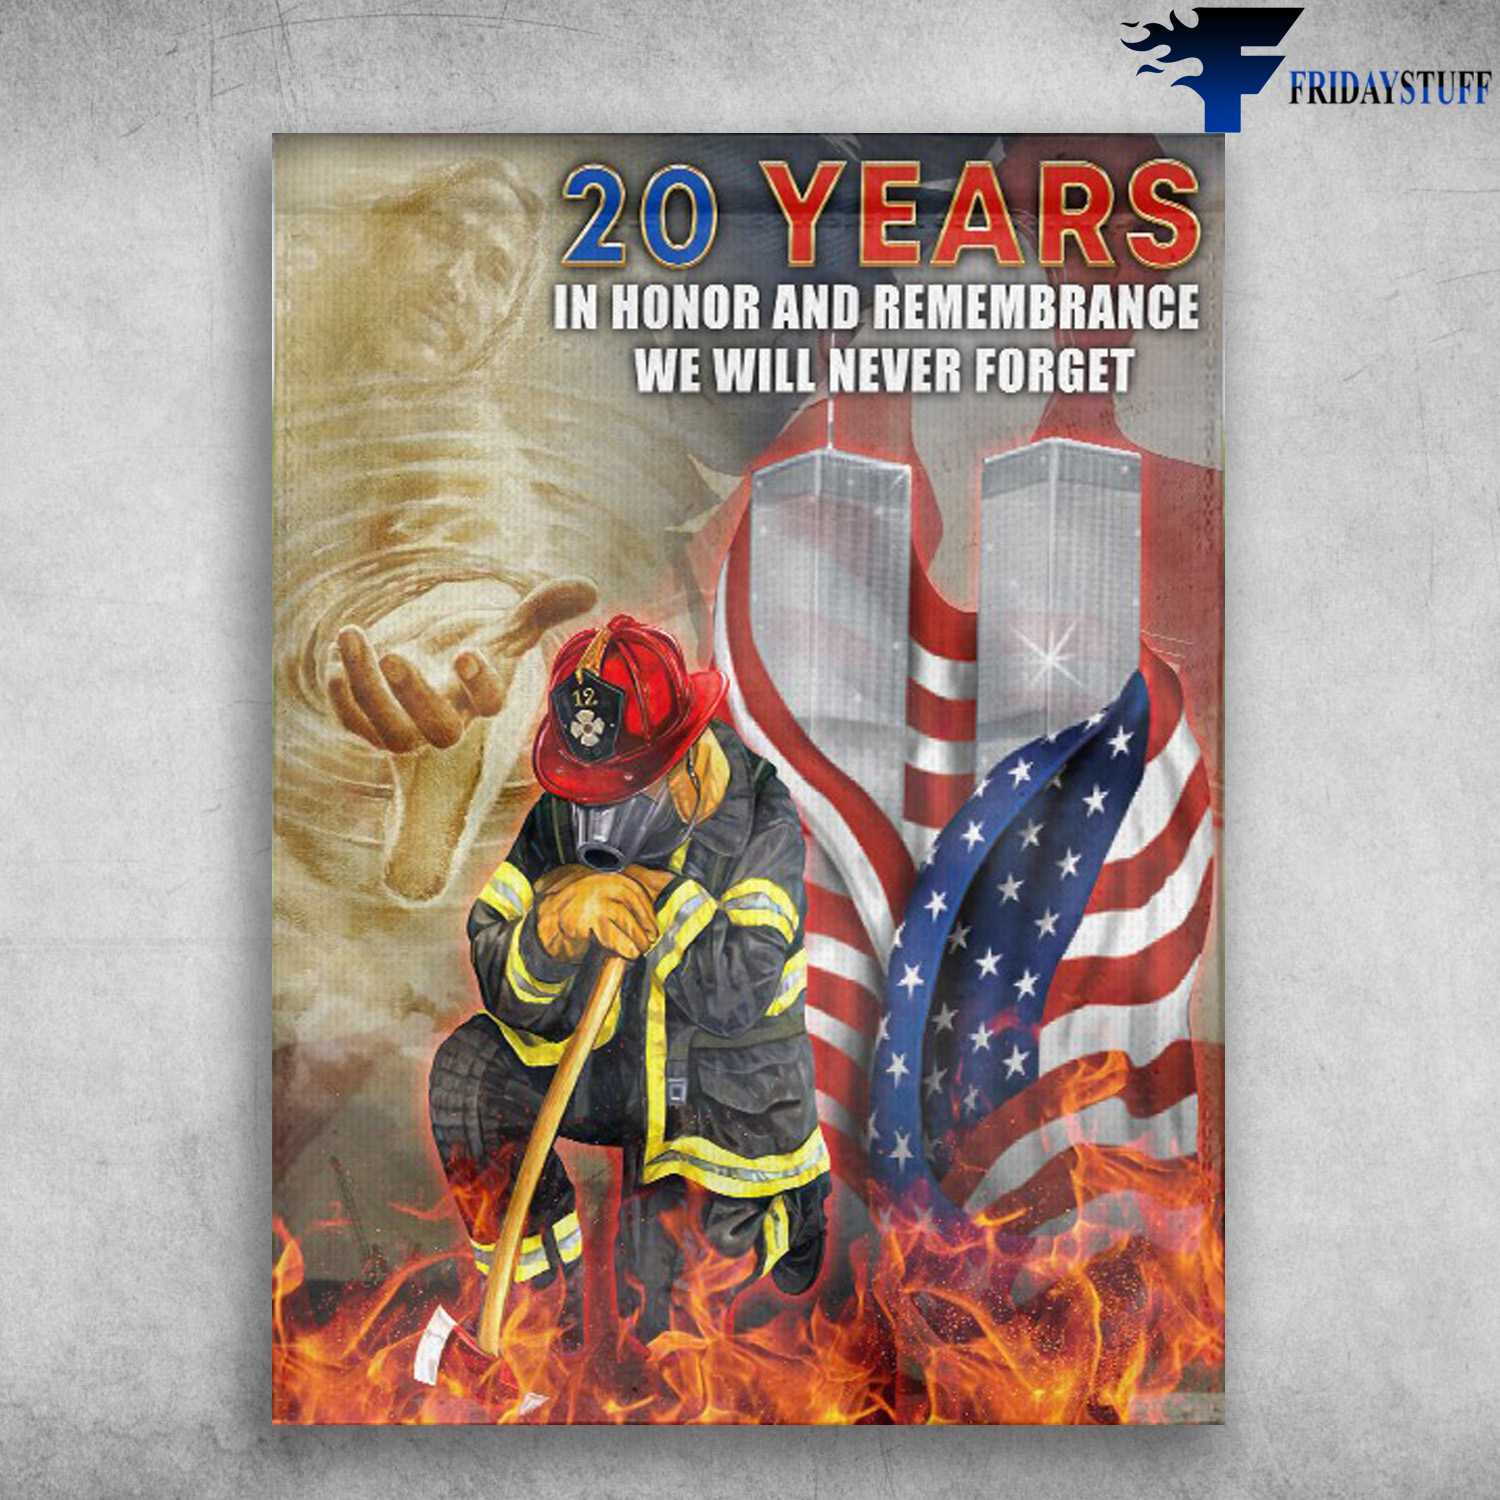 Fire Fighter American, 20 Years In Honor And Remembrance, We Will Never Forget, September 11 attacks